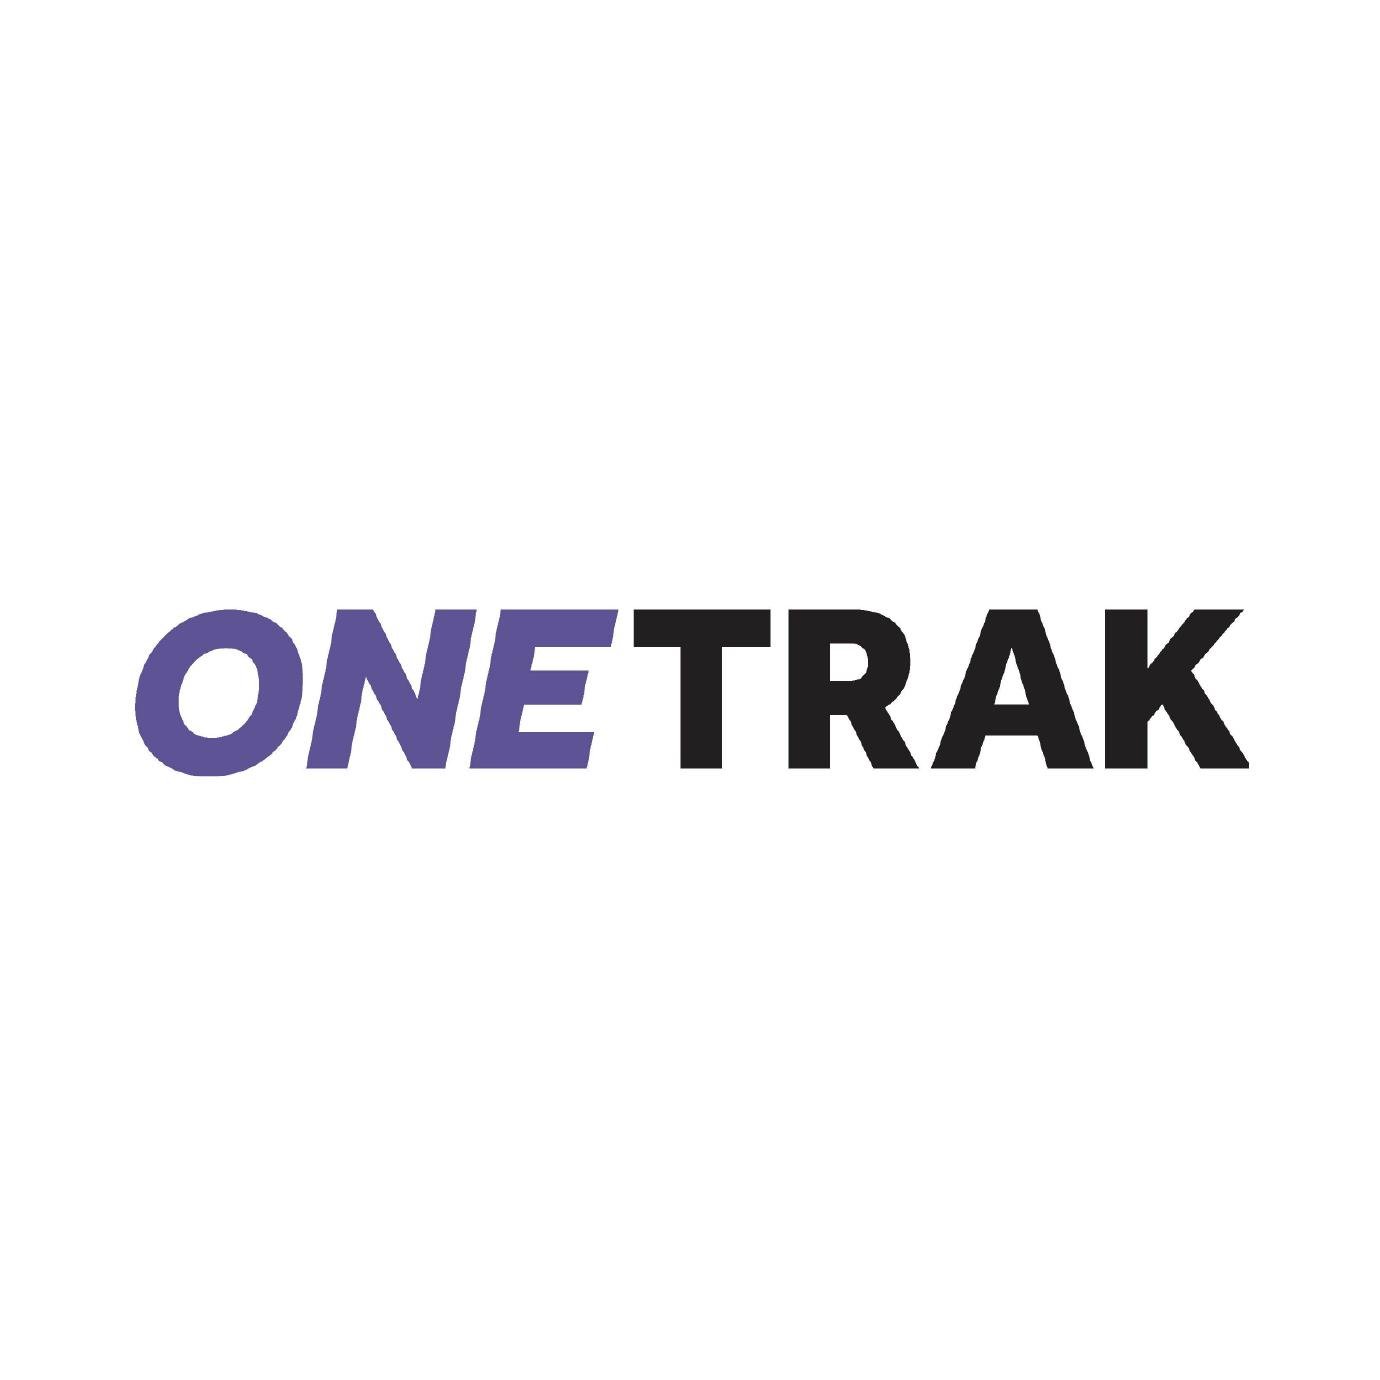 ONETRAK takes the guesswork out of global delivery and makes sending international parcels easy, providing a solution that's fuss-free, affordable and reliable.